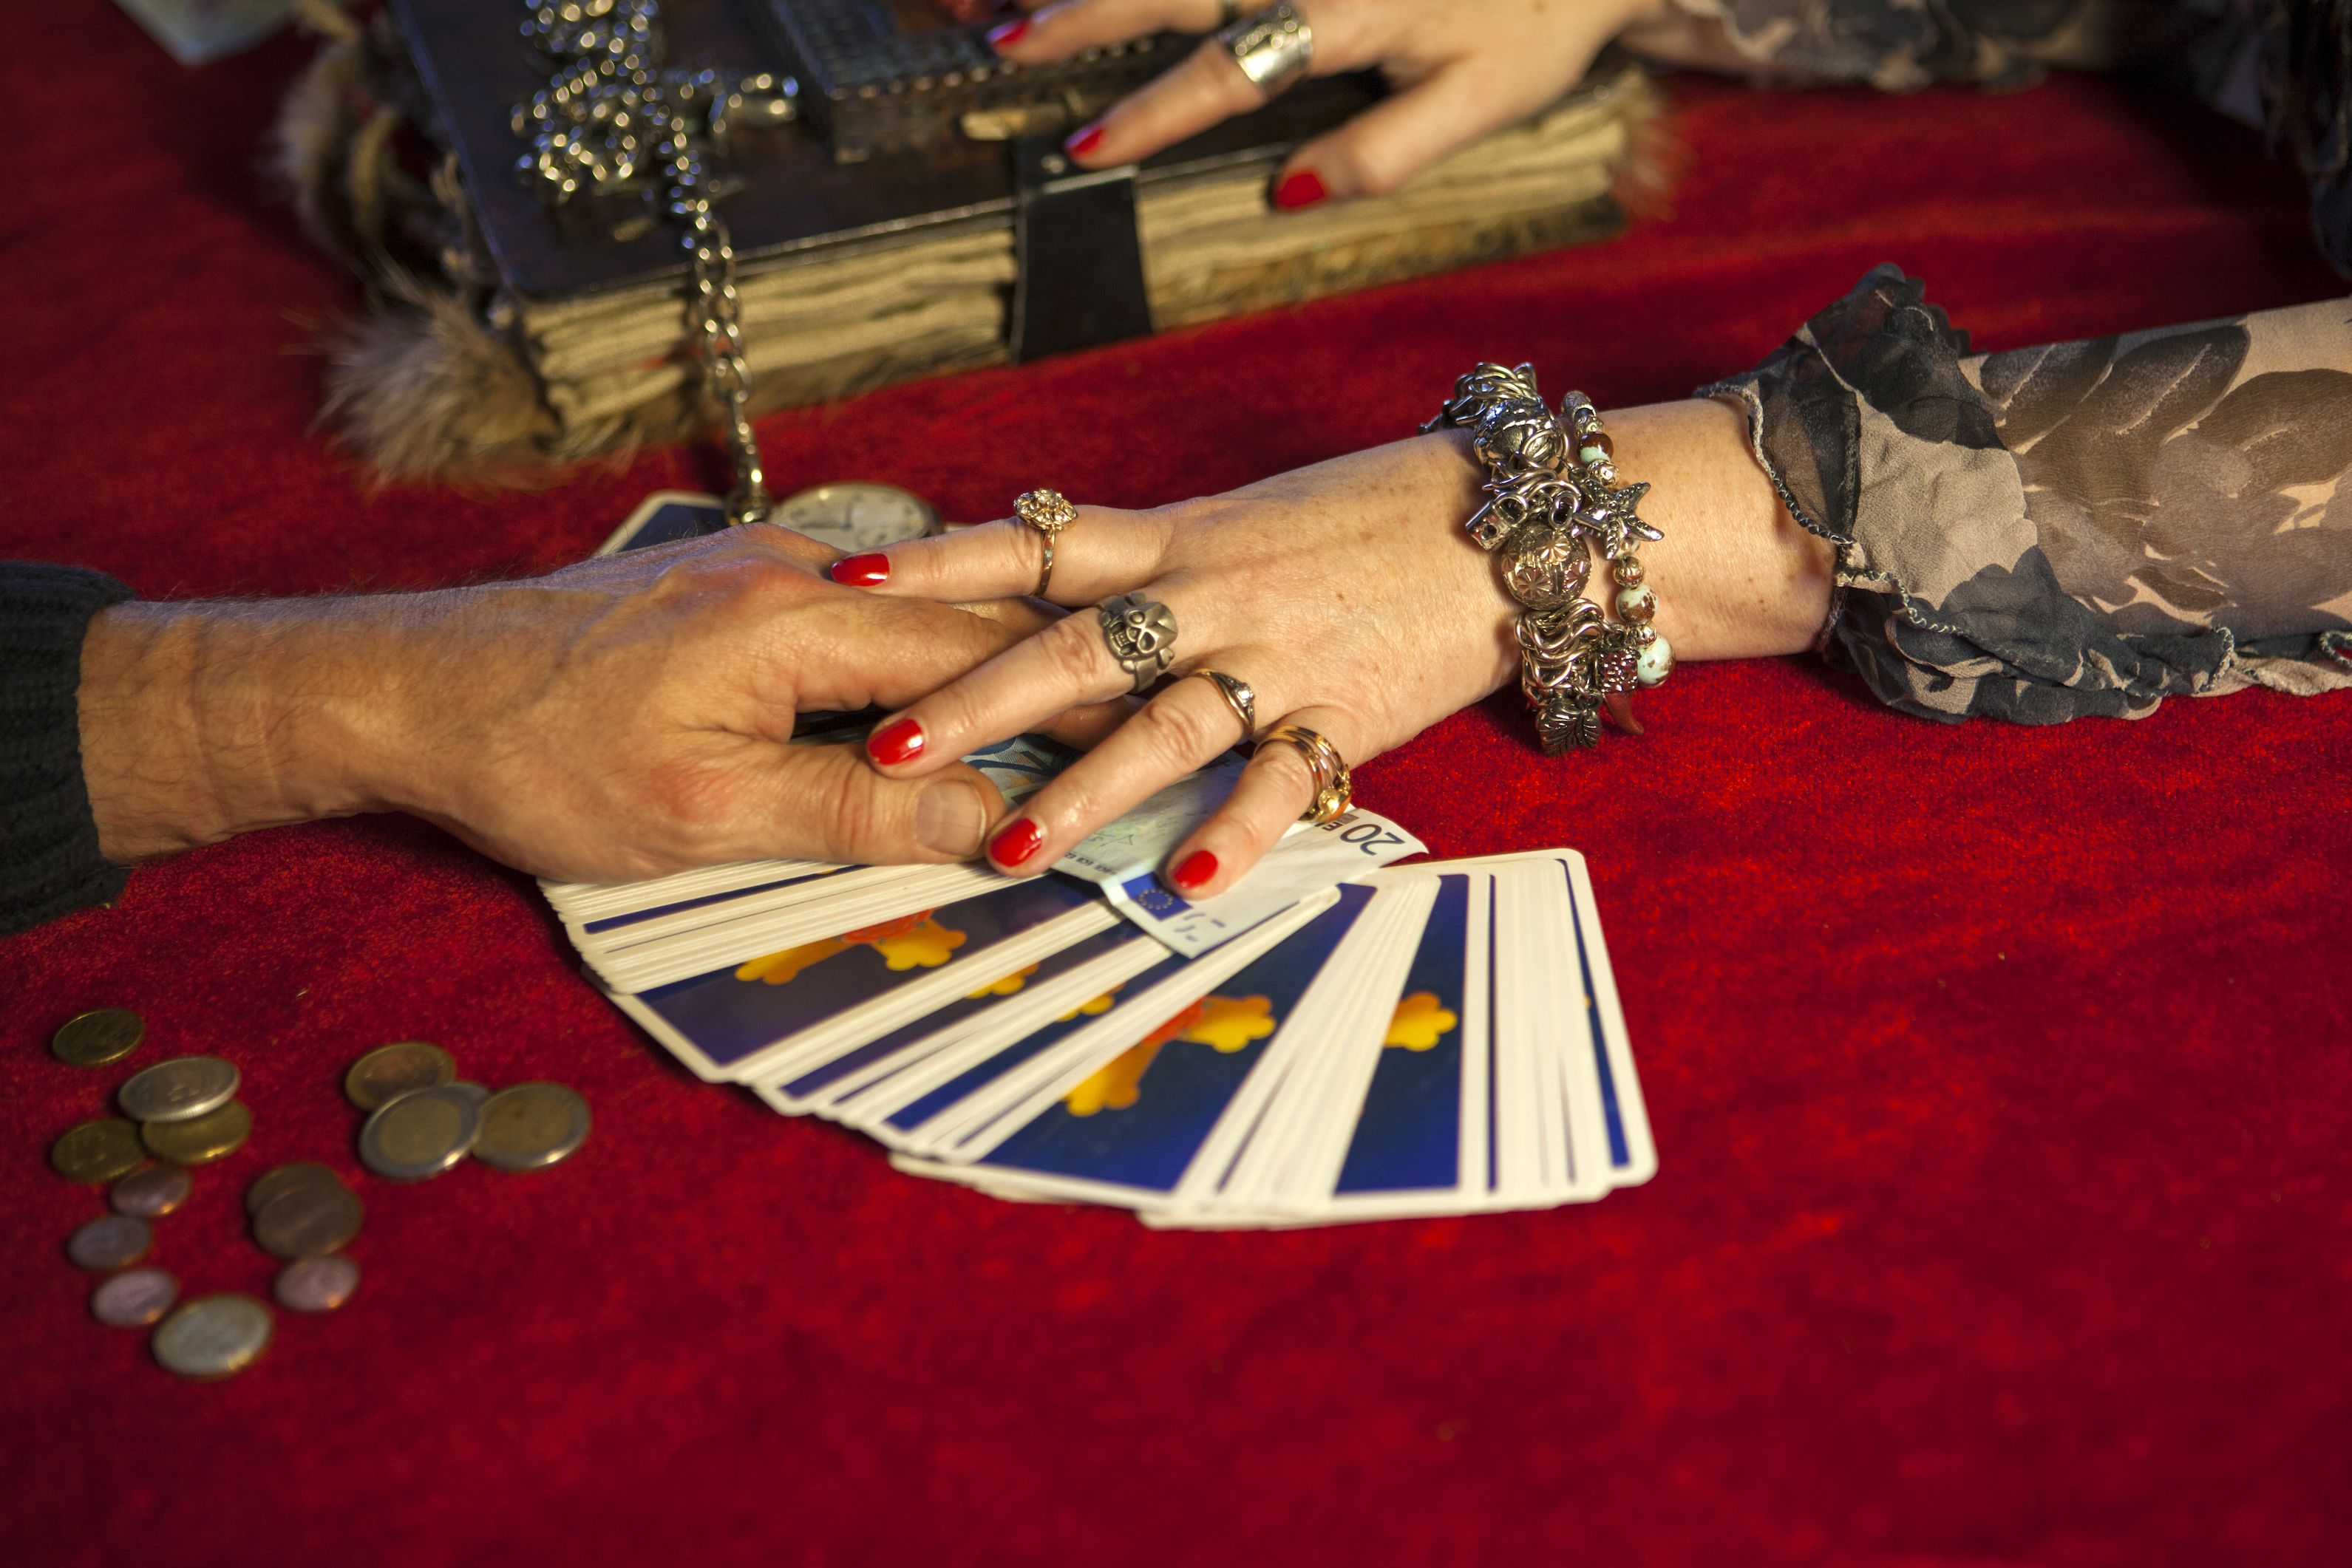 Why Are We So Obsessed With Tarot Cards?